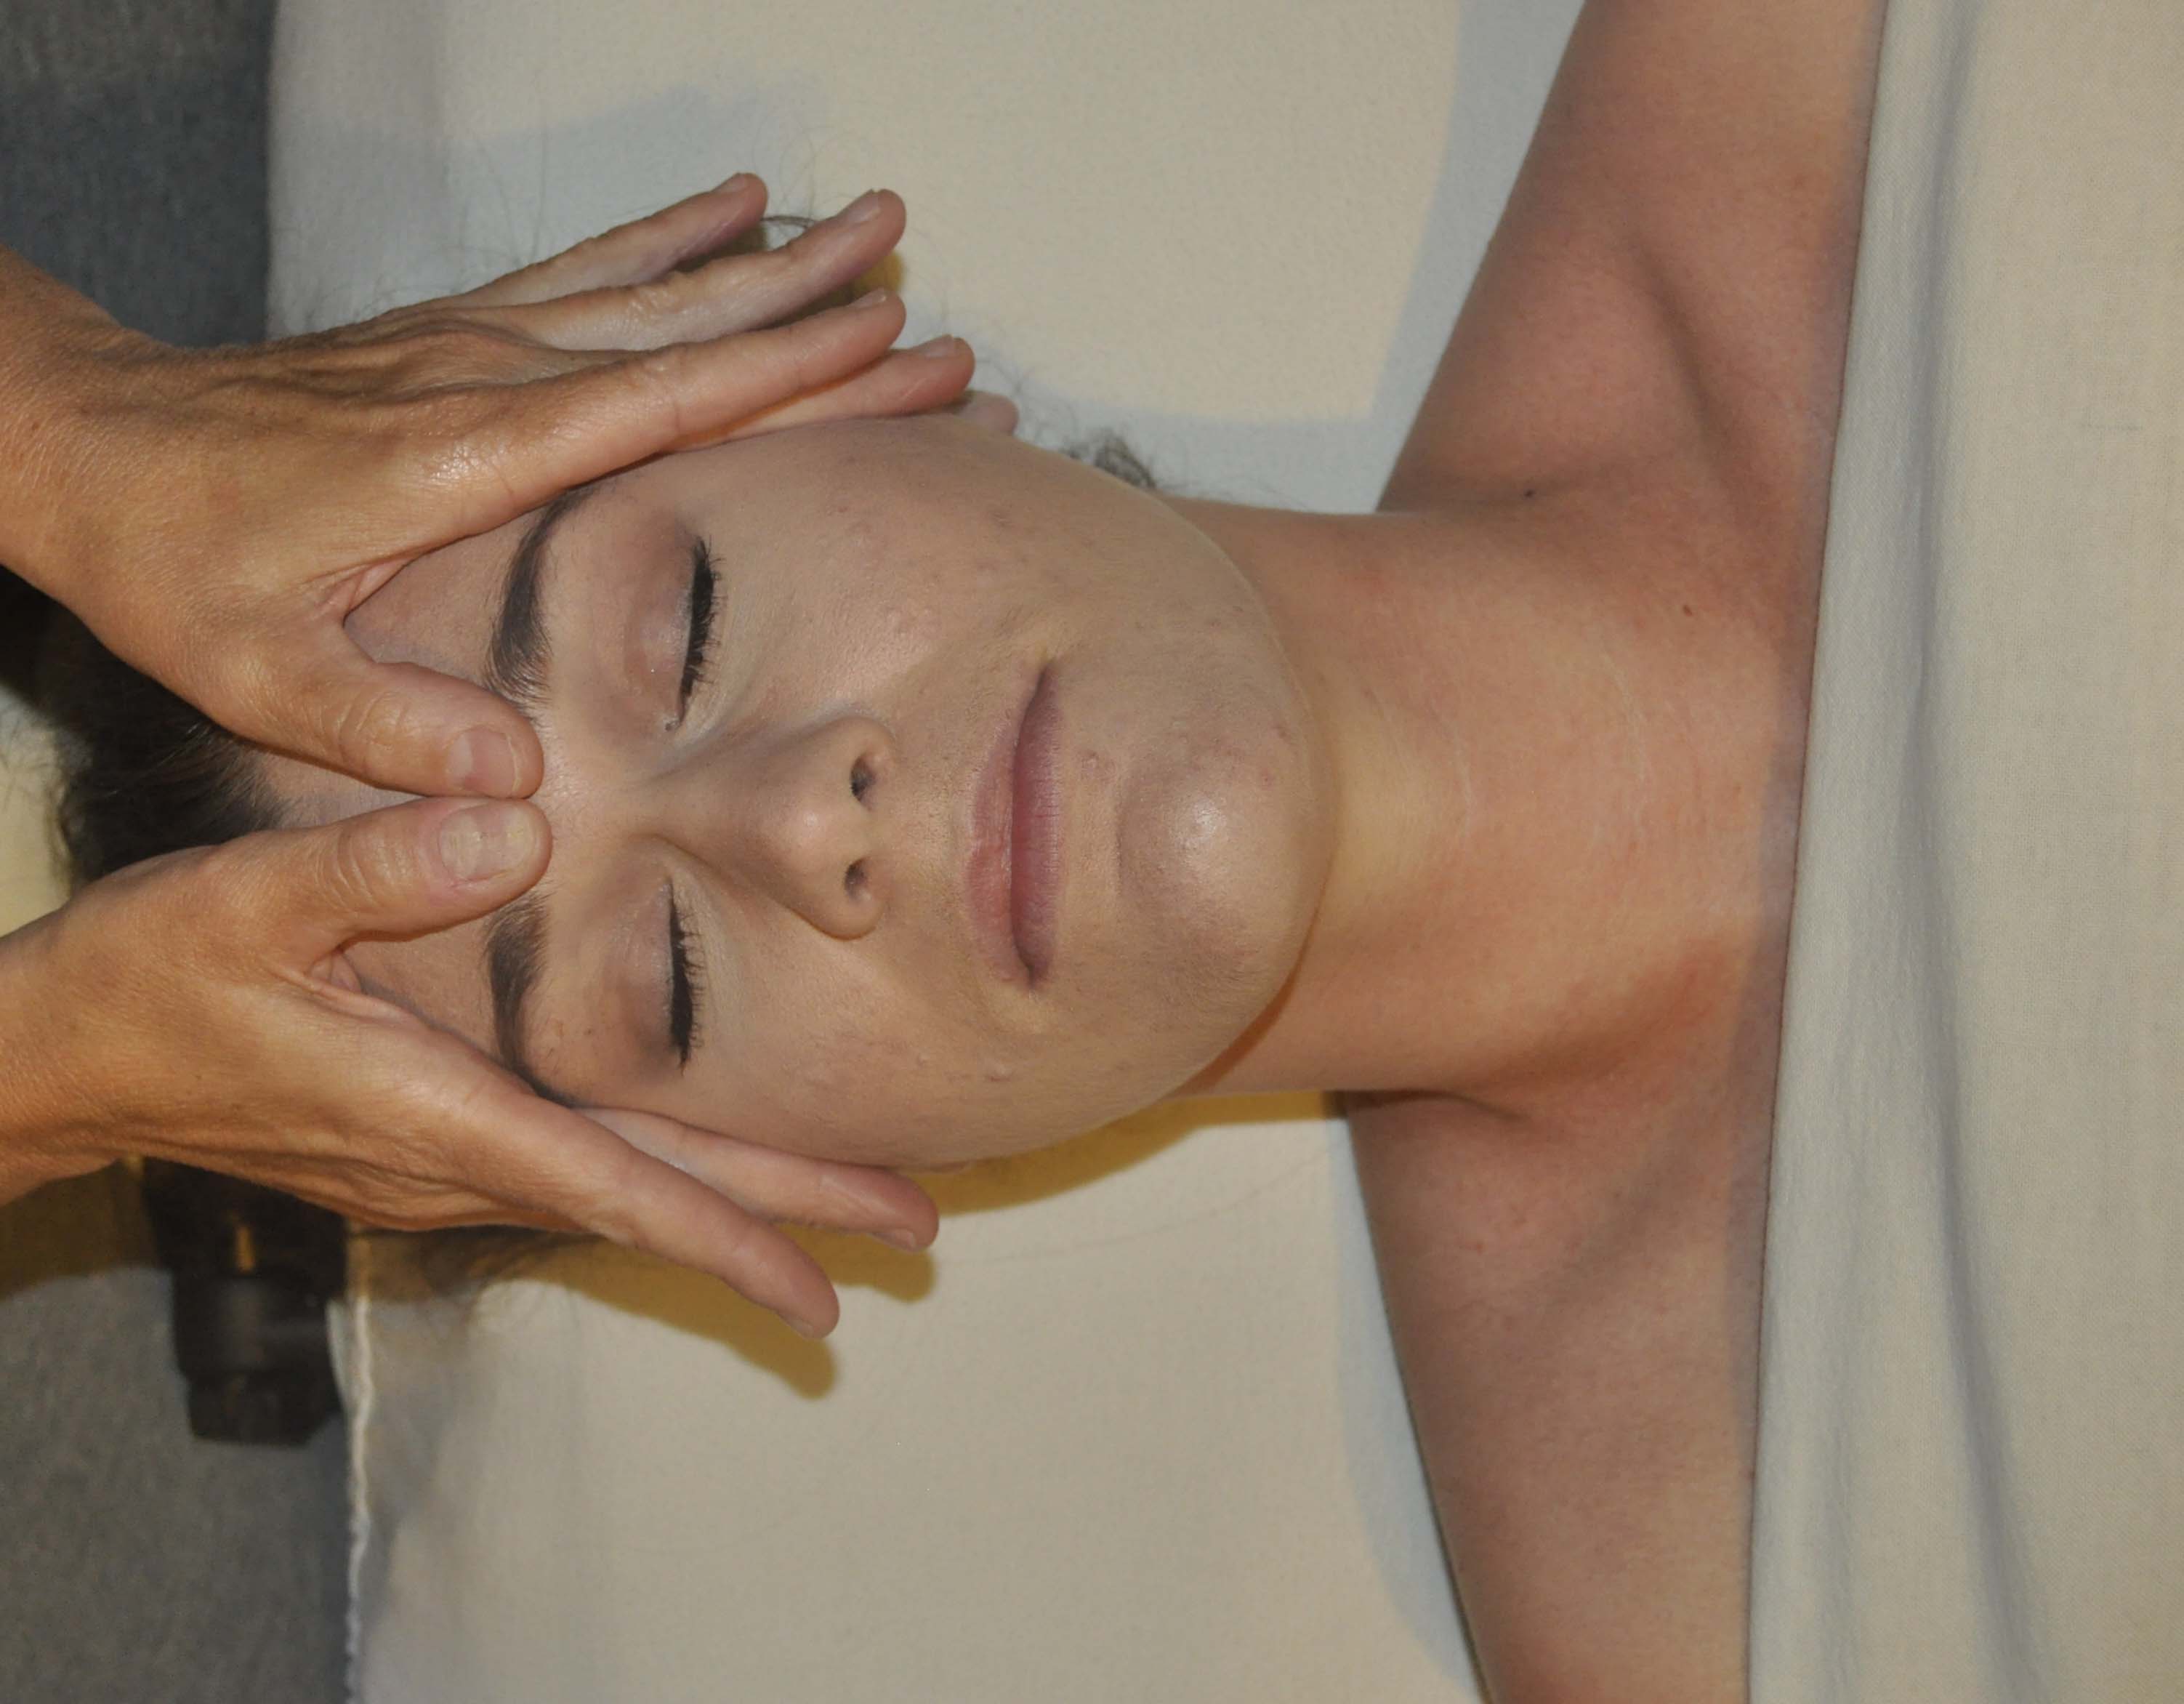 Stress relieving massage benefits for body, mind, and spirit!